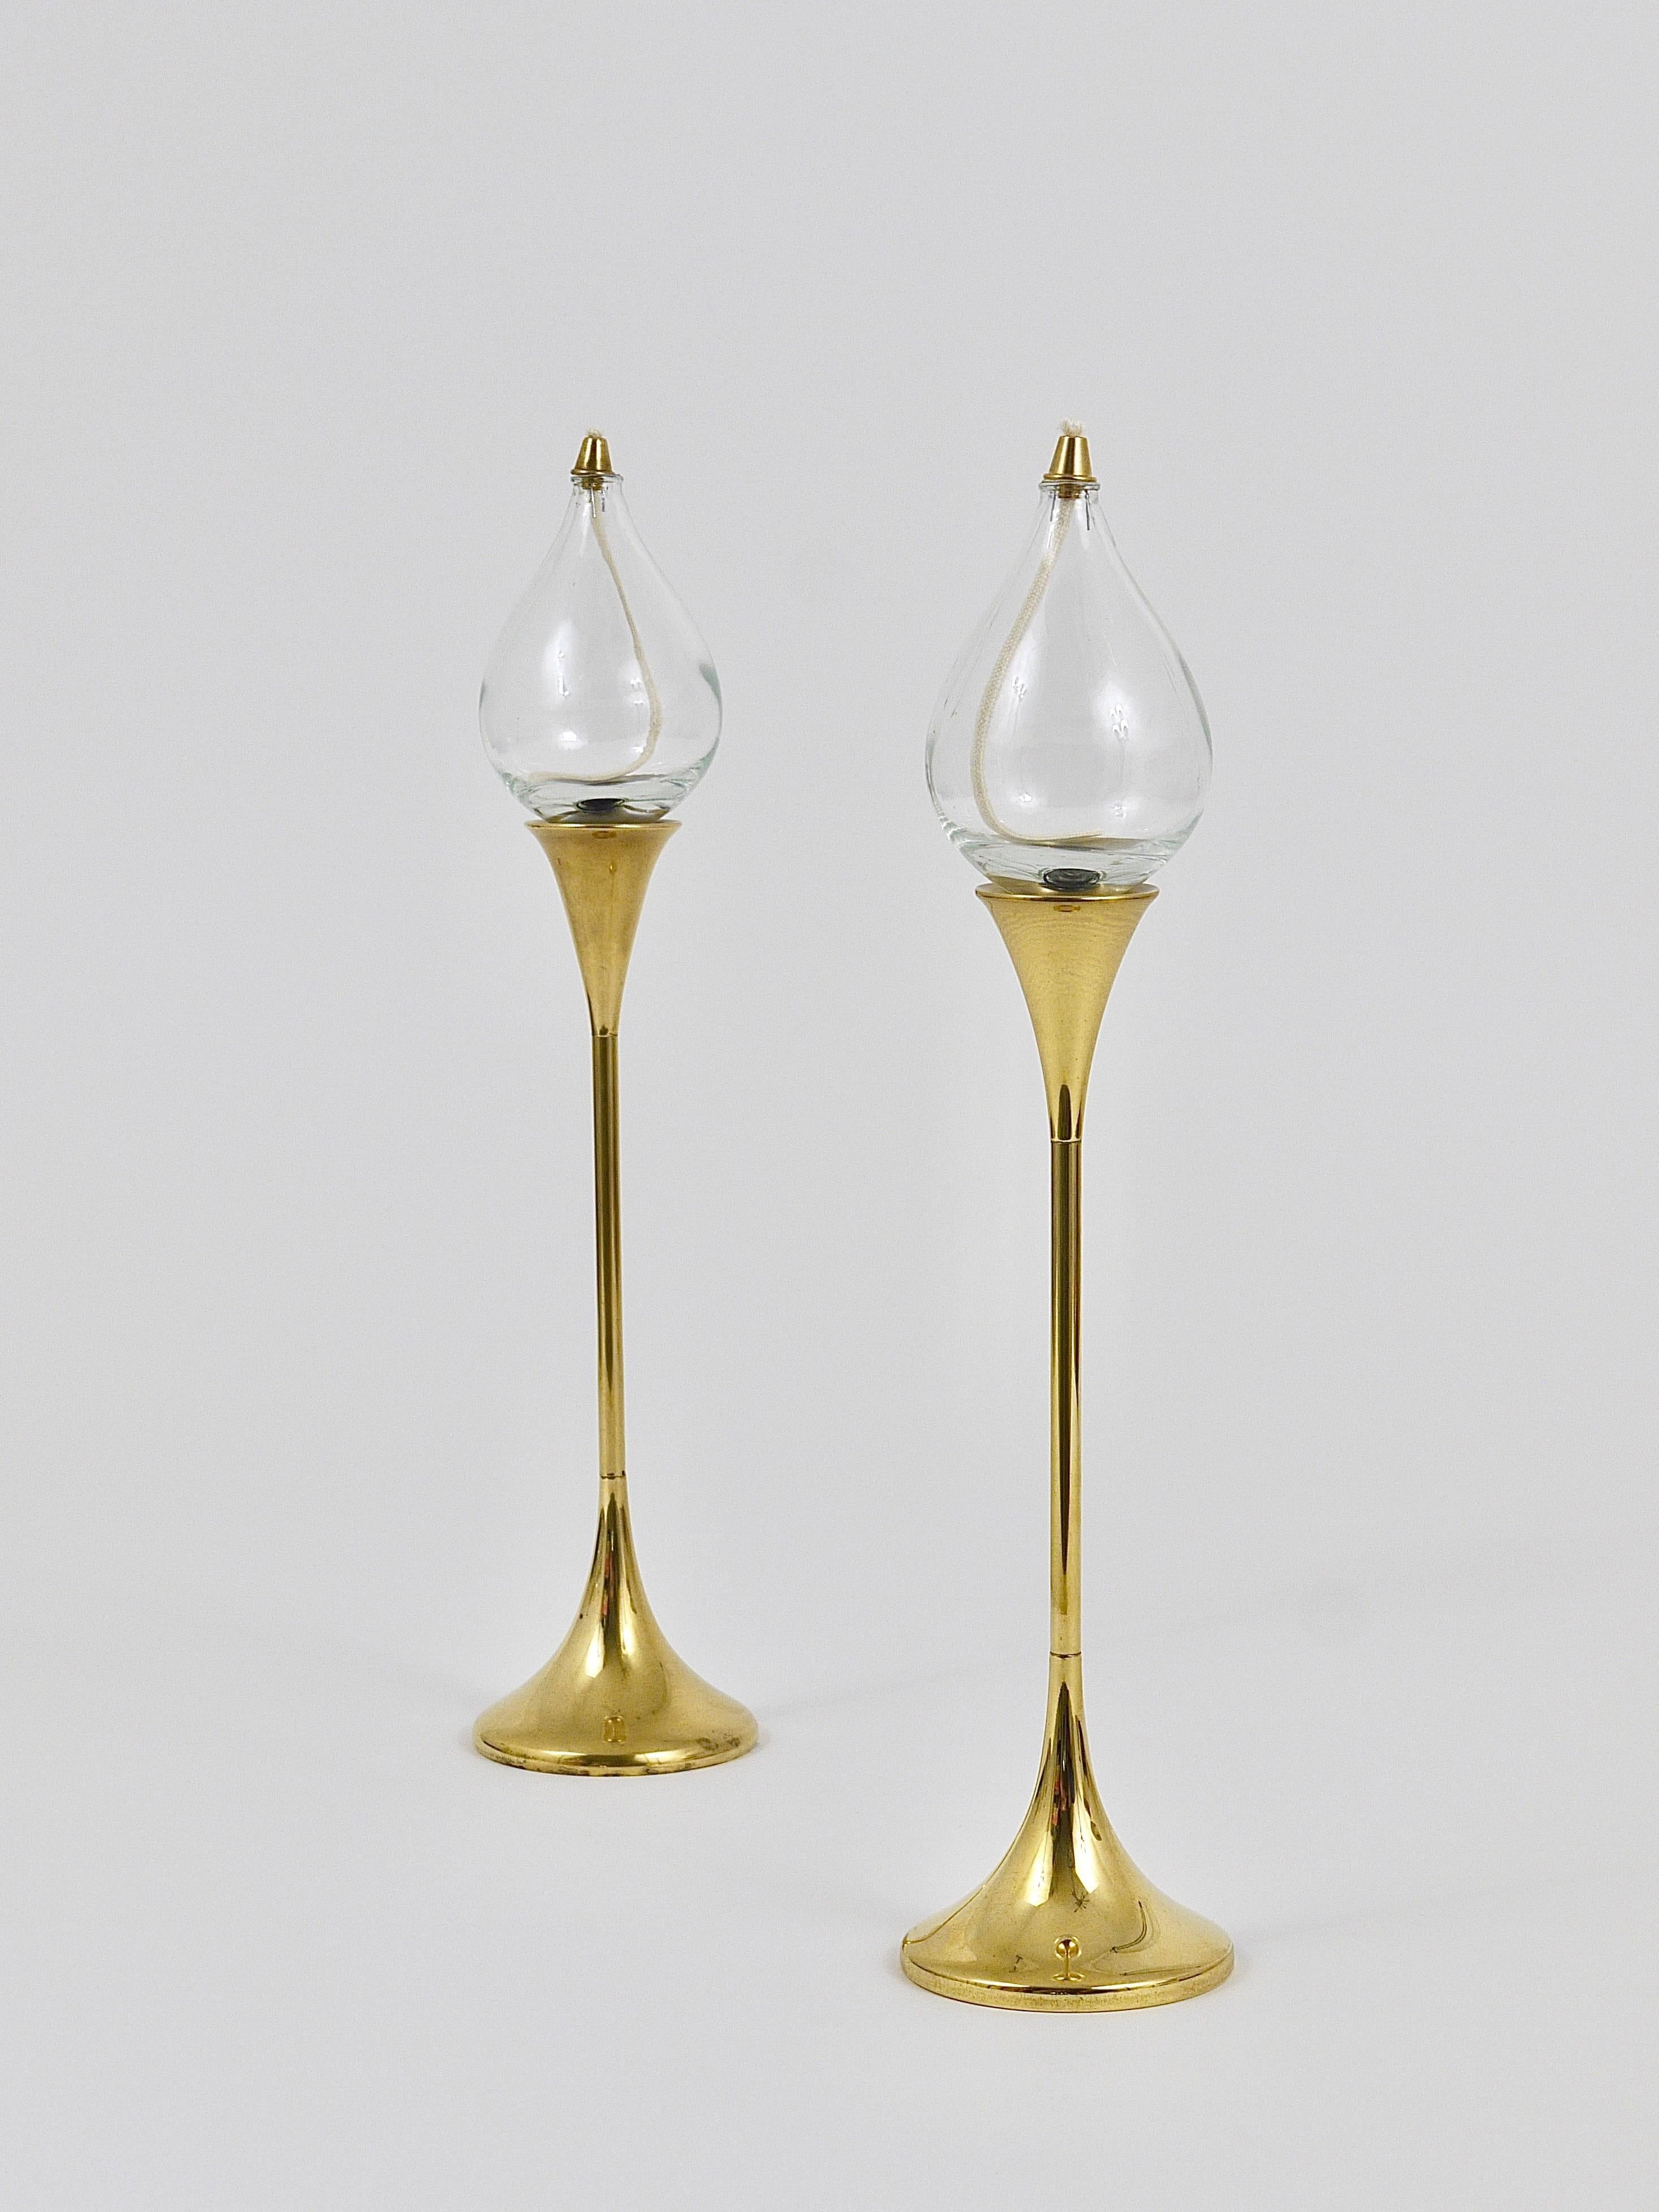 Two beautiful 14 in high modernist brass oil lamp candlesticks, designed by Freddie Andersen, made in Western Germany in the 1970s. In very good condition. Two candleholders are available, sold and priced per piece.